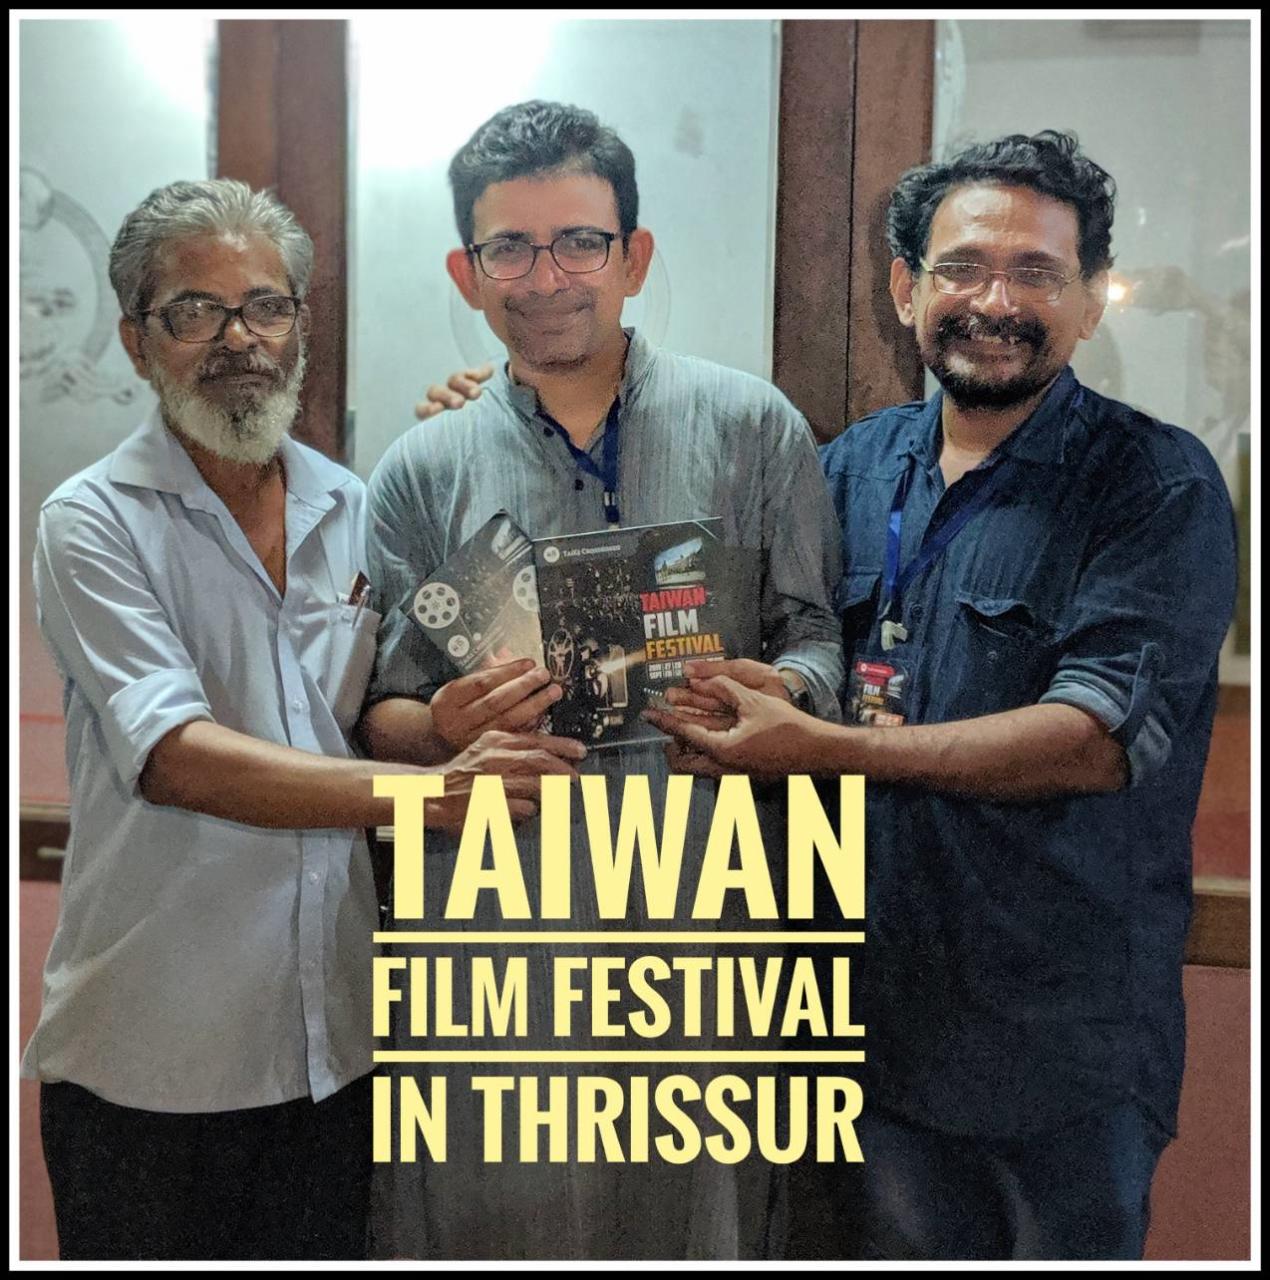 Taiwan Film Festival Was Held In Thrissur Cul Taipei Economic And Cultural Center In Chennai é§æ¸…å¥ˆè‡ºåŒ—ç¶